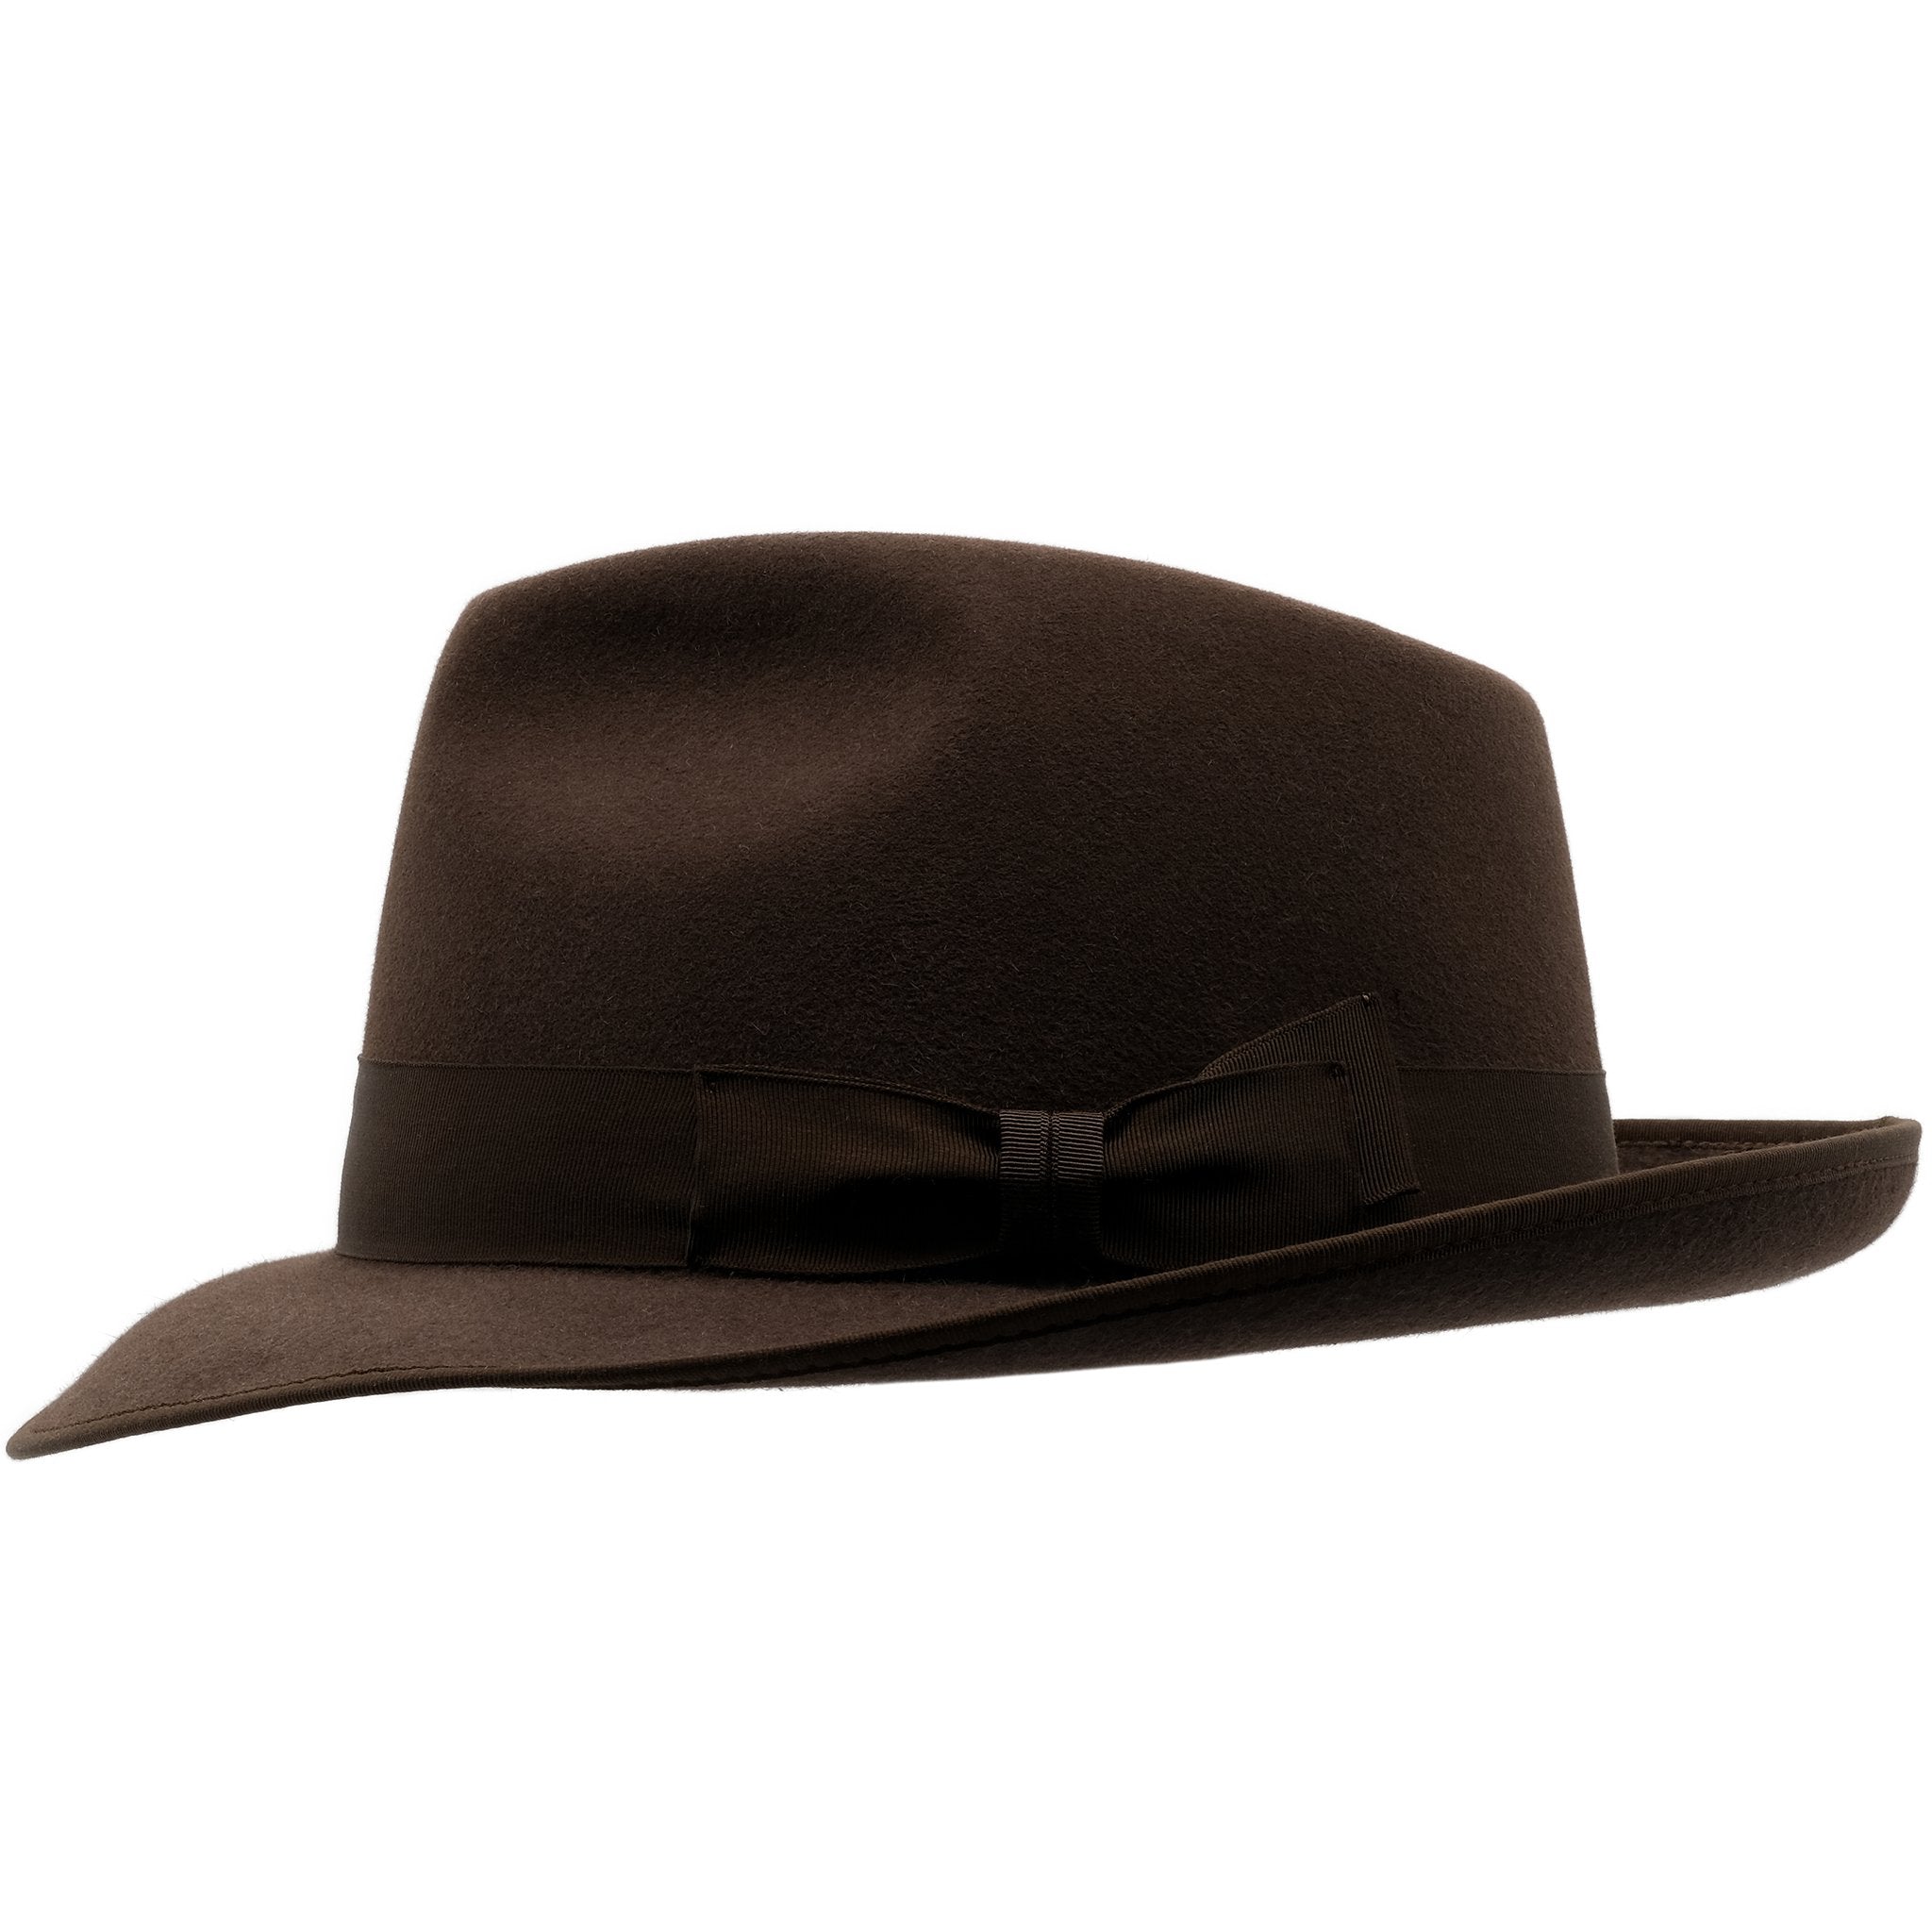 Side view of Akubra Stylemaster hat in Loden colour